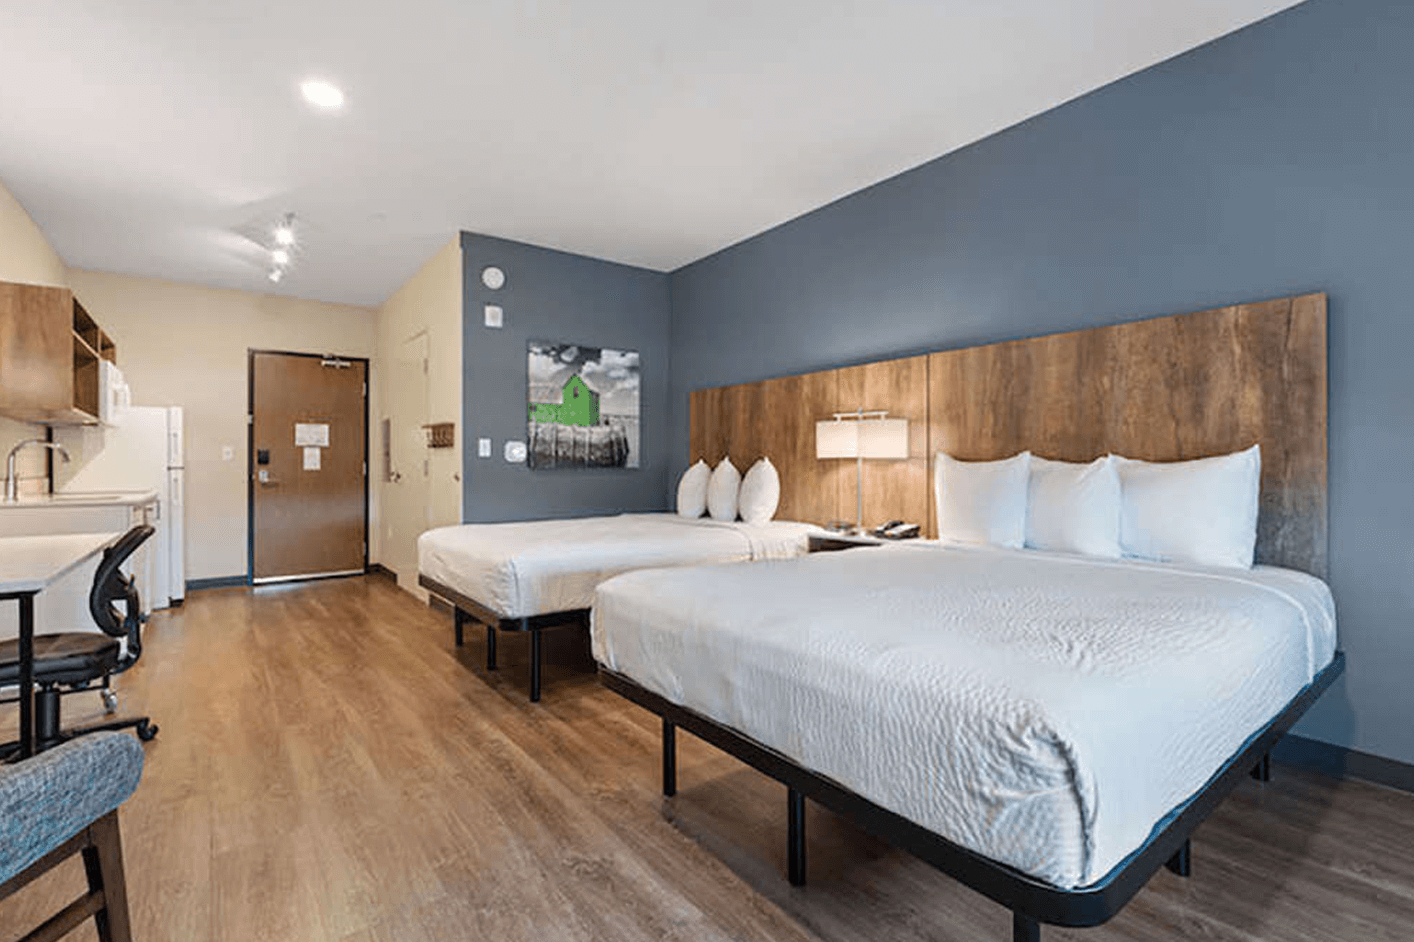 Interior of a modern, Extended Stay America hotel room with two queen beds, wooden floors and steel grey walls.